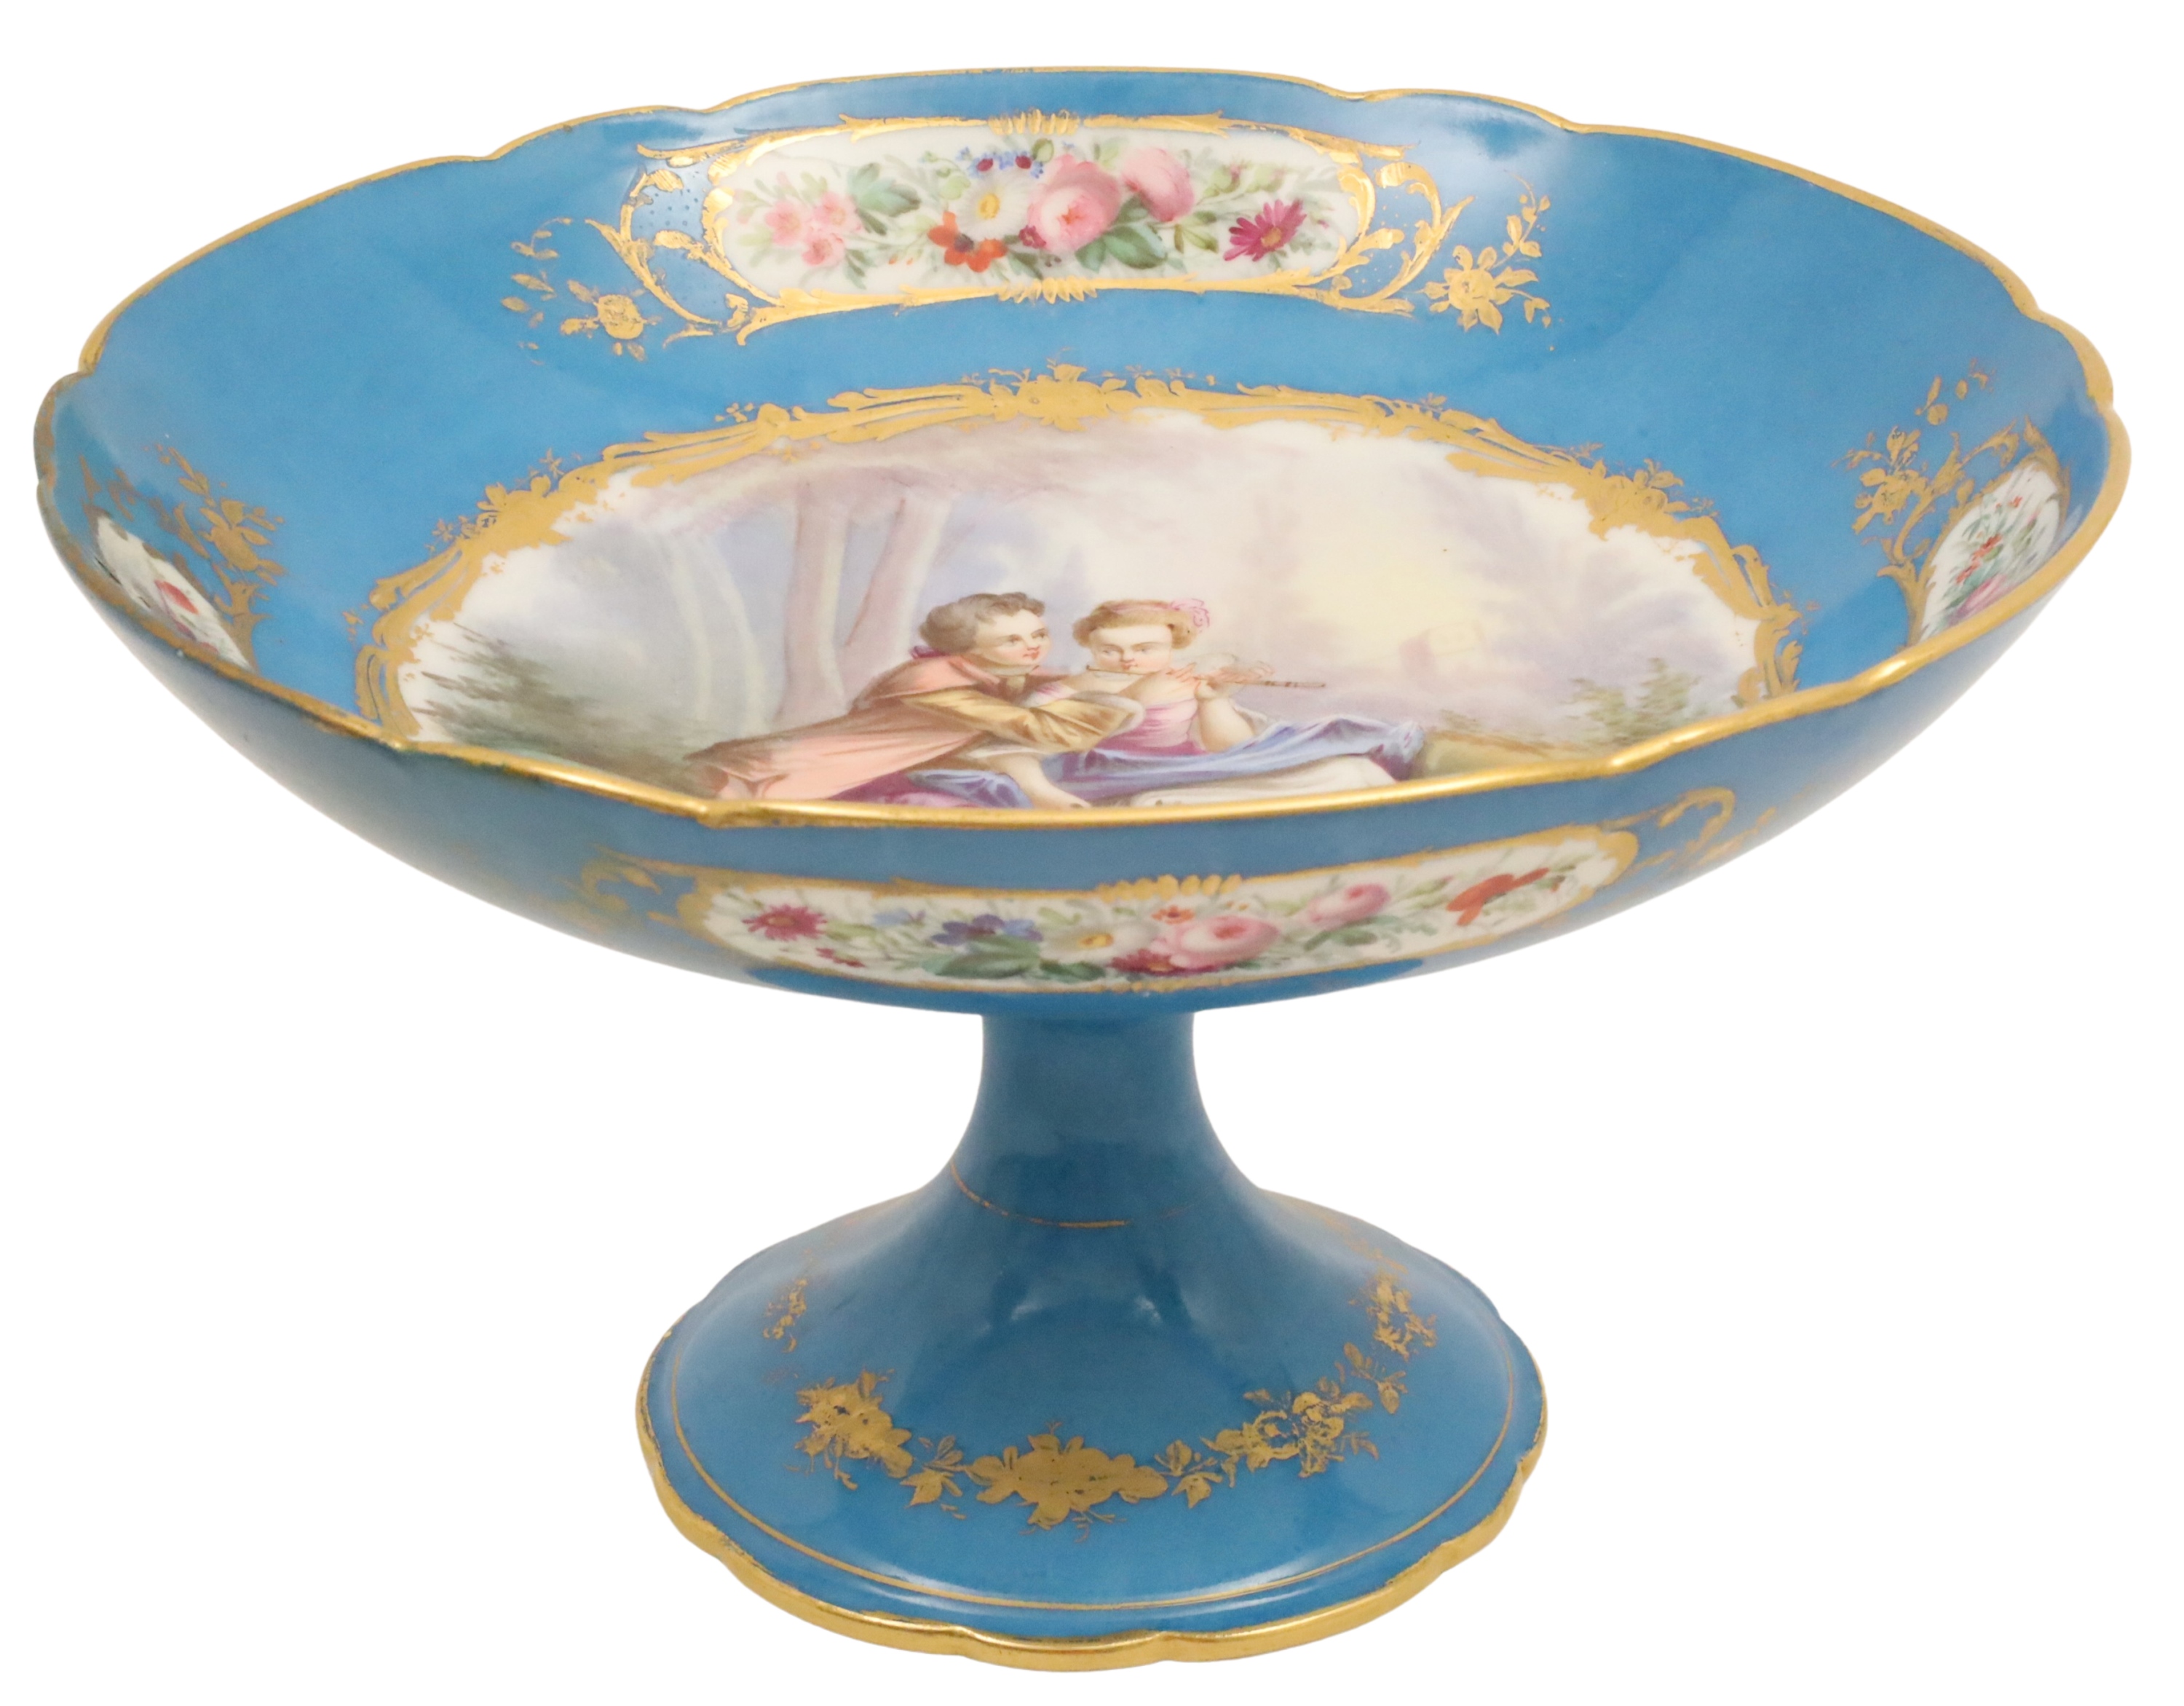 FRENCH SEVRES PORCELAIN COMPOTE A French